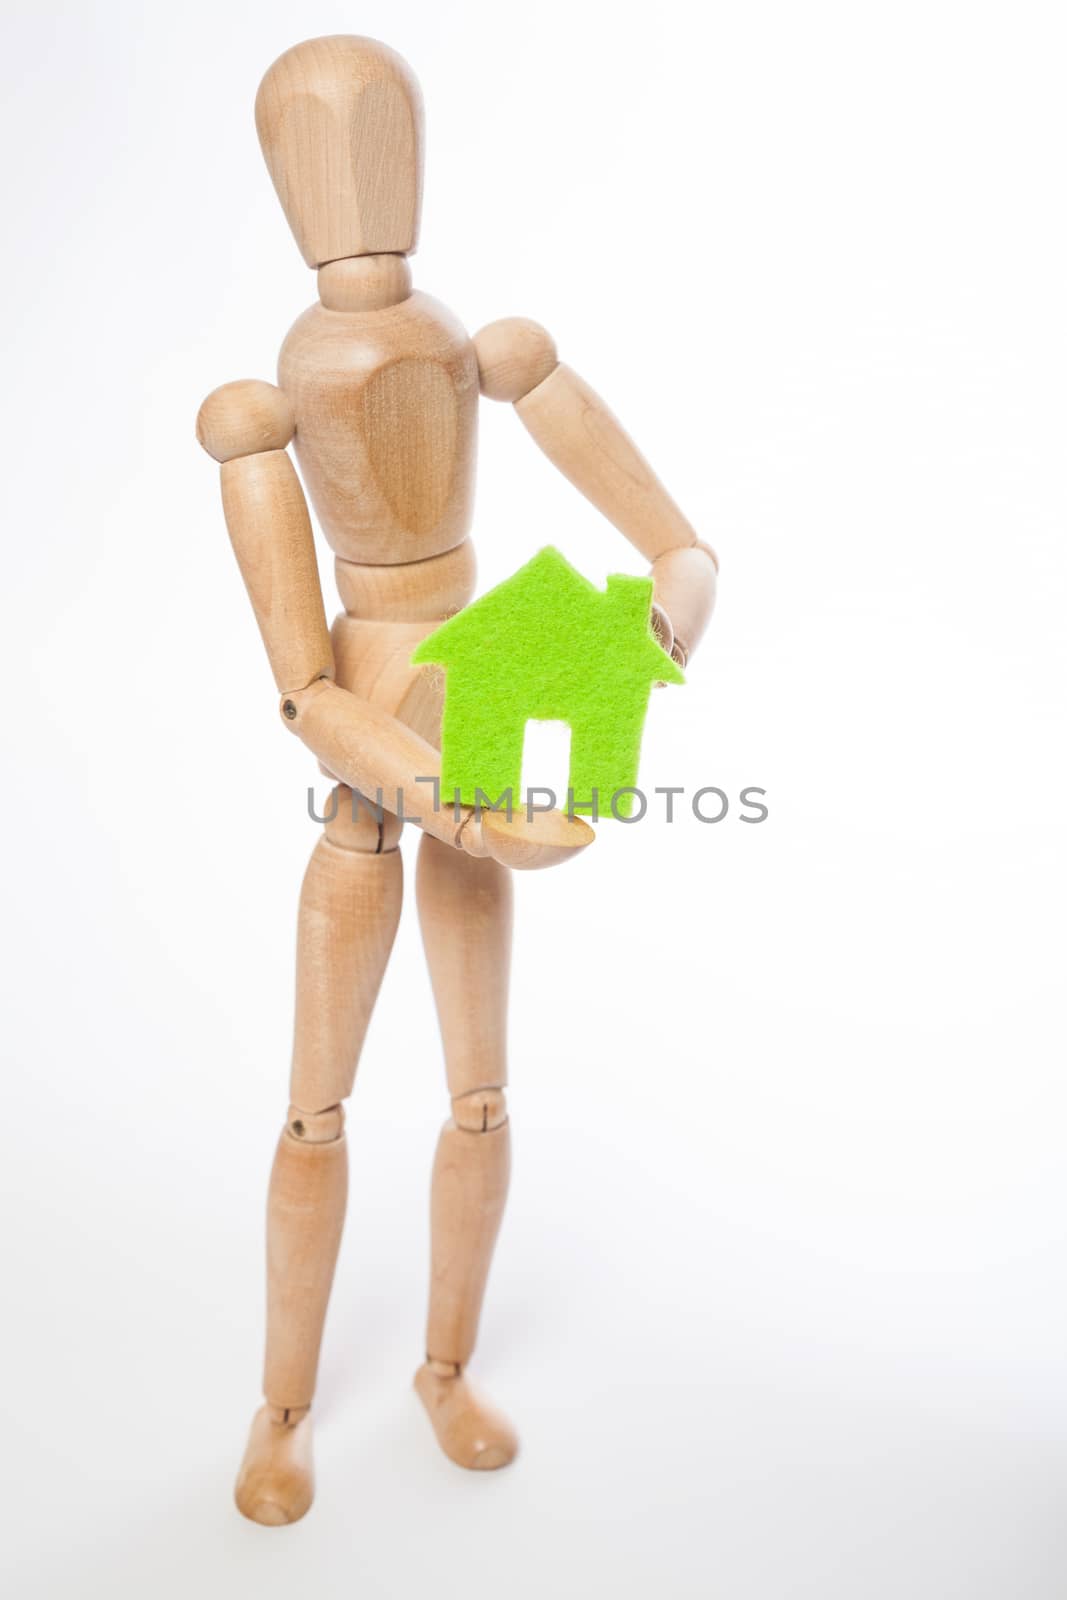 Wooden puppet and house by Portokalis